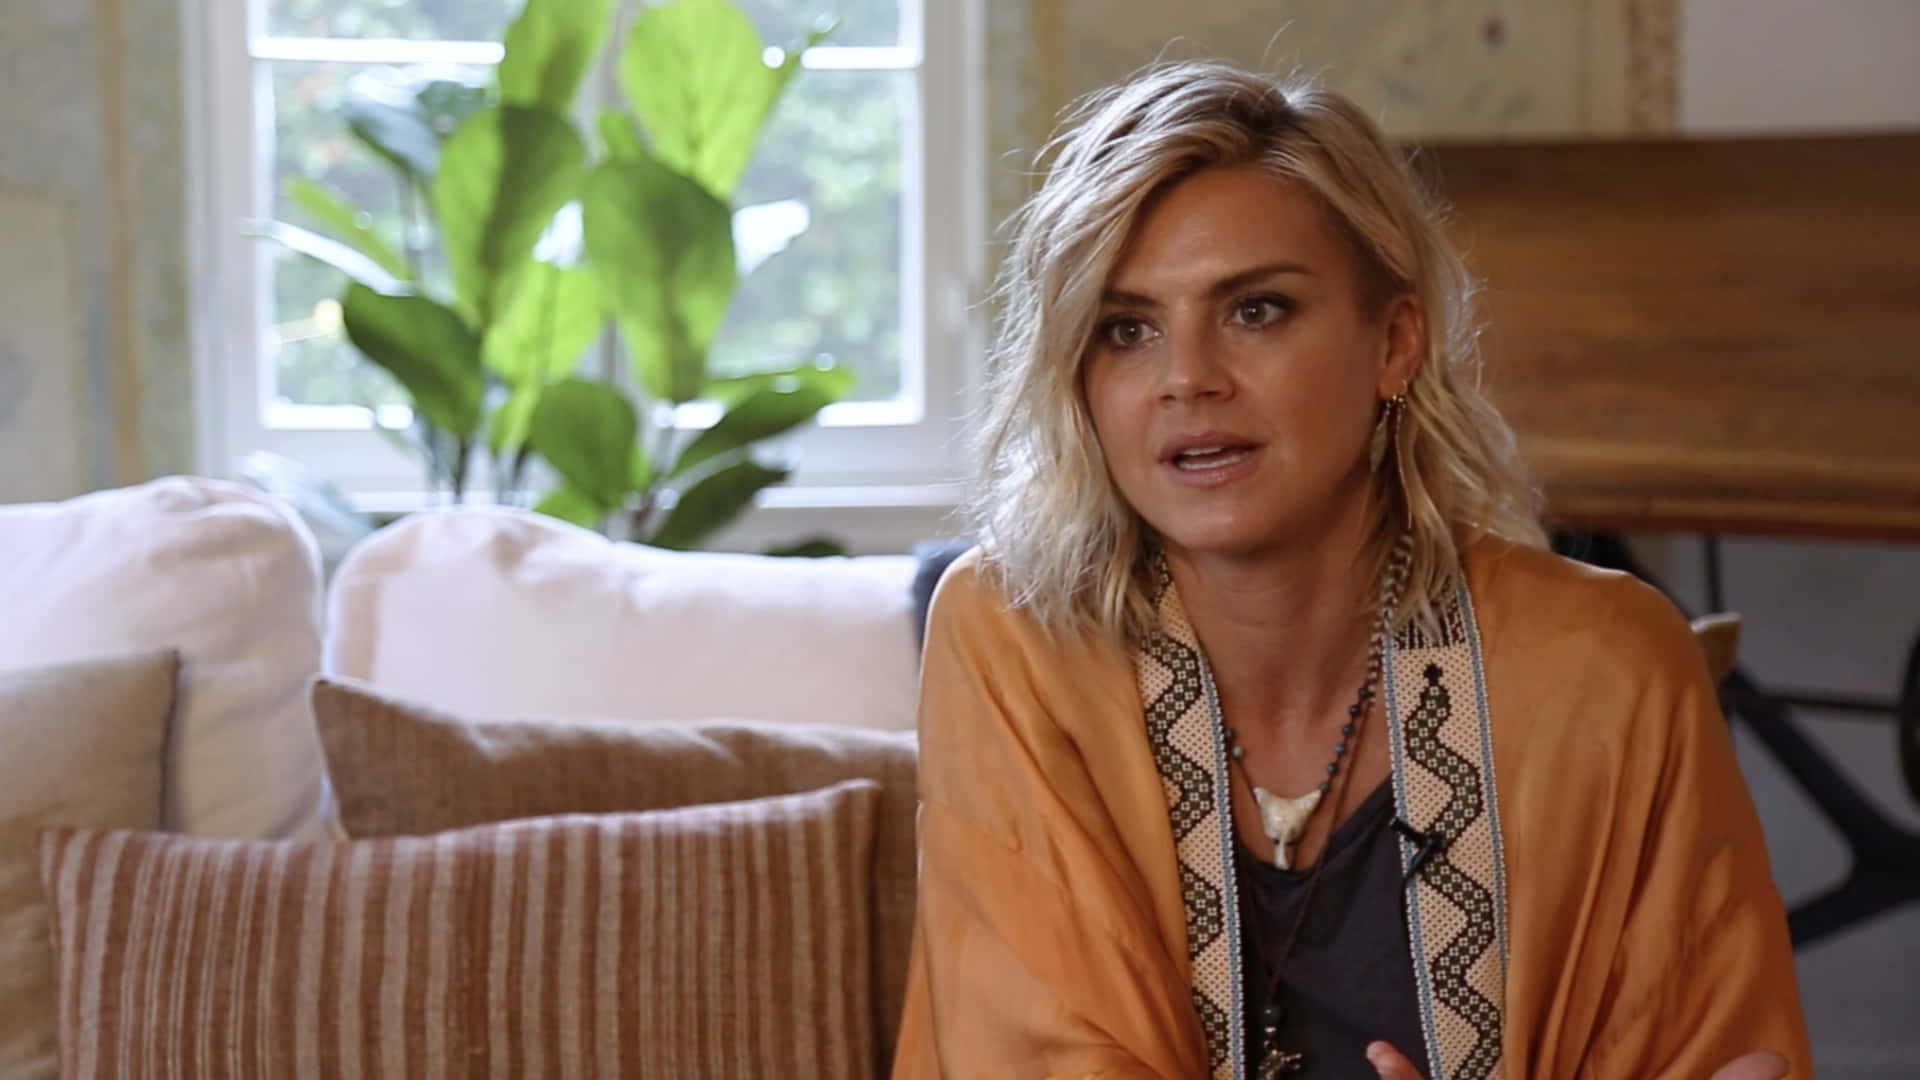 Eliza Coupe striking a pose in front of a patterned background Wallpaper